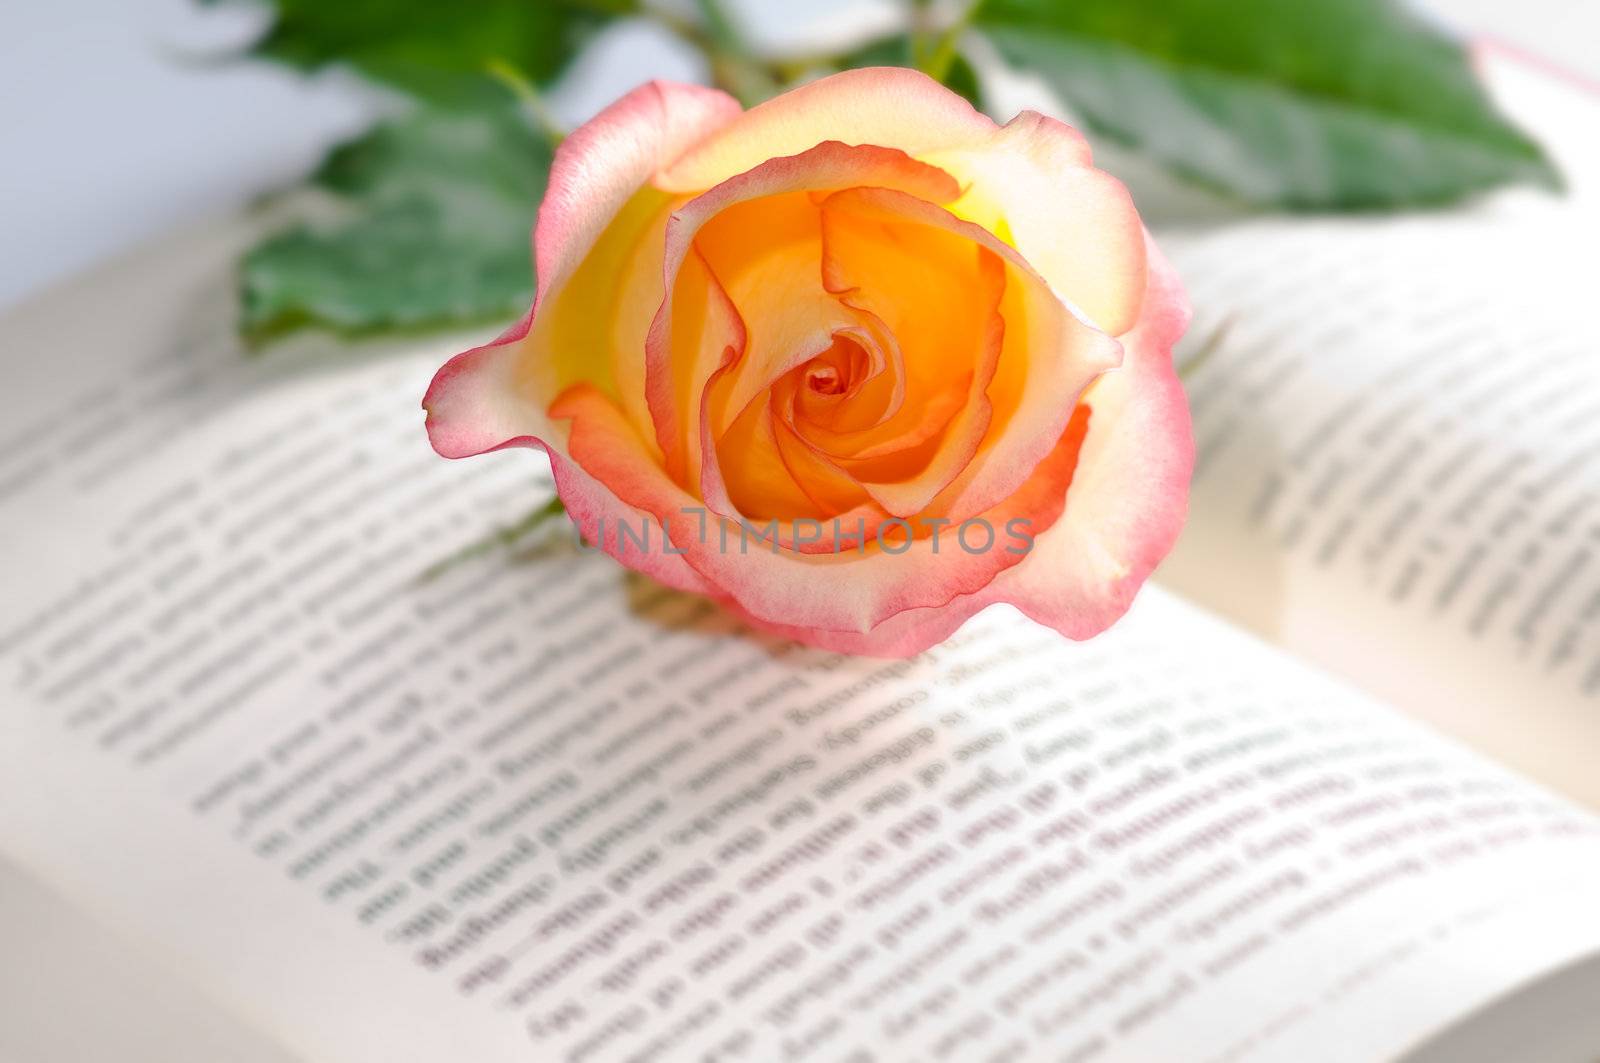 Red yellow rose over a book by 3523Studio